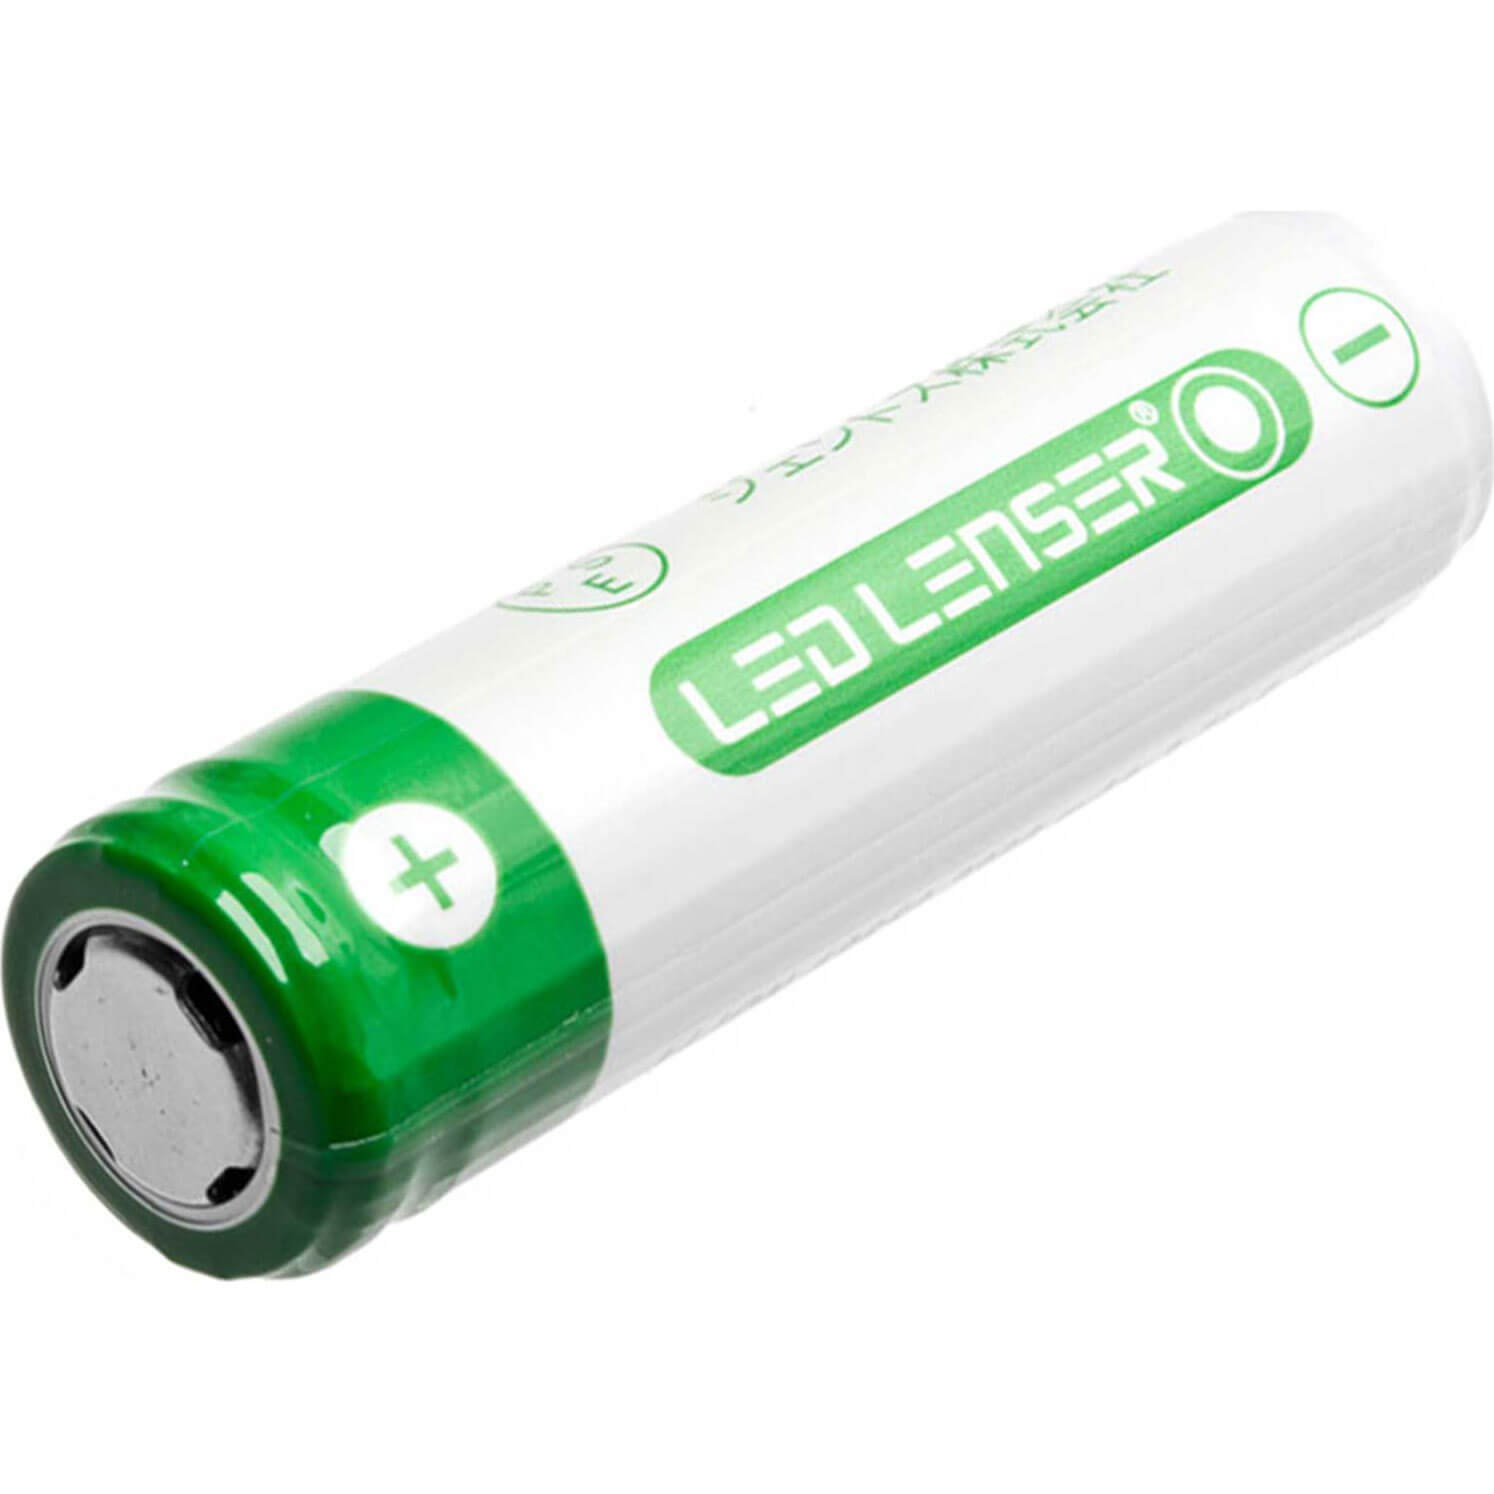 Image of LED Lenser Genuine Rechargeable Battery for iH8R, H8R and P7R Torches Pack of 1